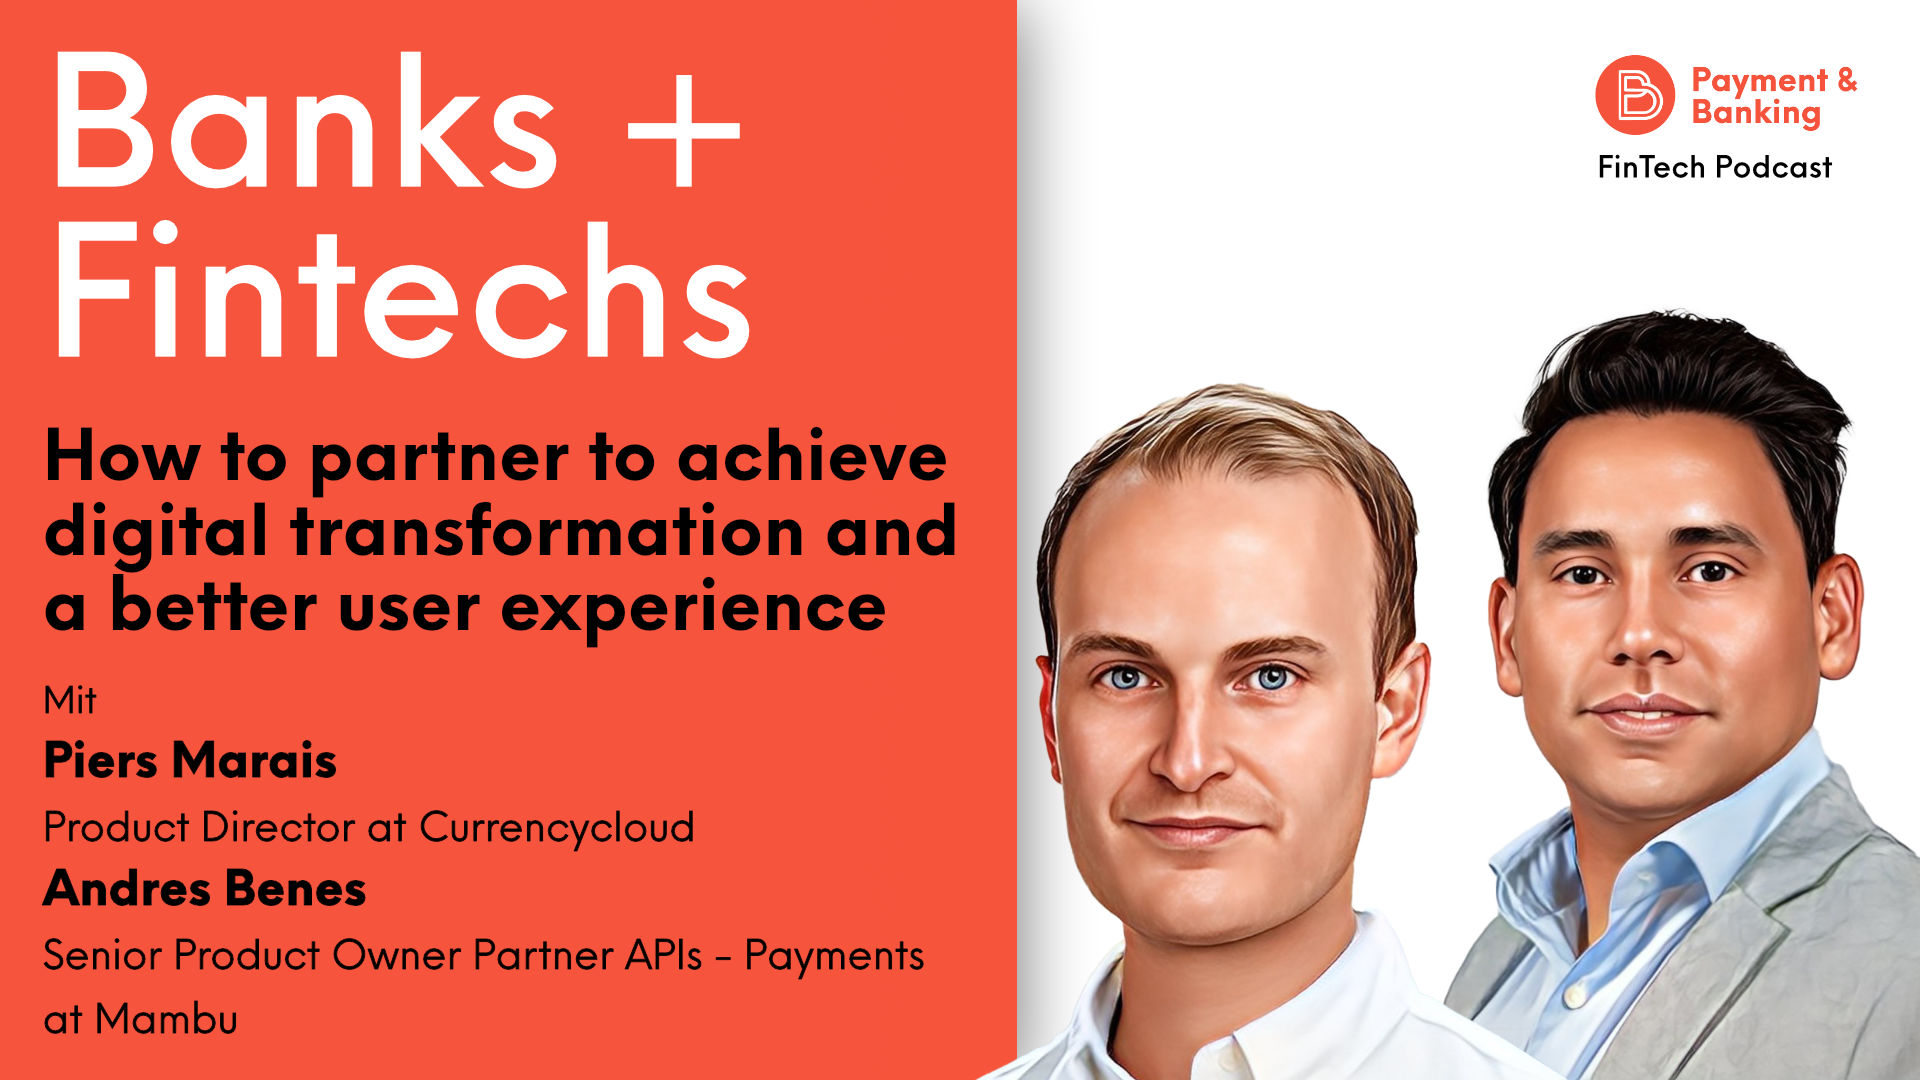 A couple of years ago, Mambu and Currencycloud partnered by integrating Mambu’s SaaS banking platform with Currencycloud’s suite of APIs, thereby enabling customers to rapidly deploy flexible, enterprise-class collections, virtual accounts, payments and FX services. What happened since then and what are the learnings from that partnership so far.